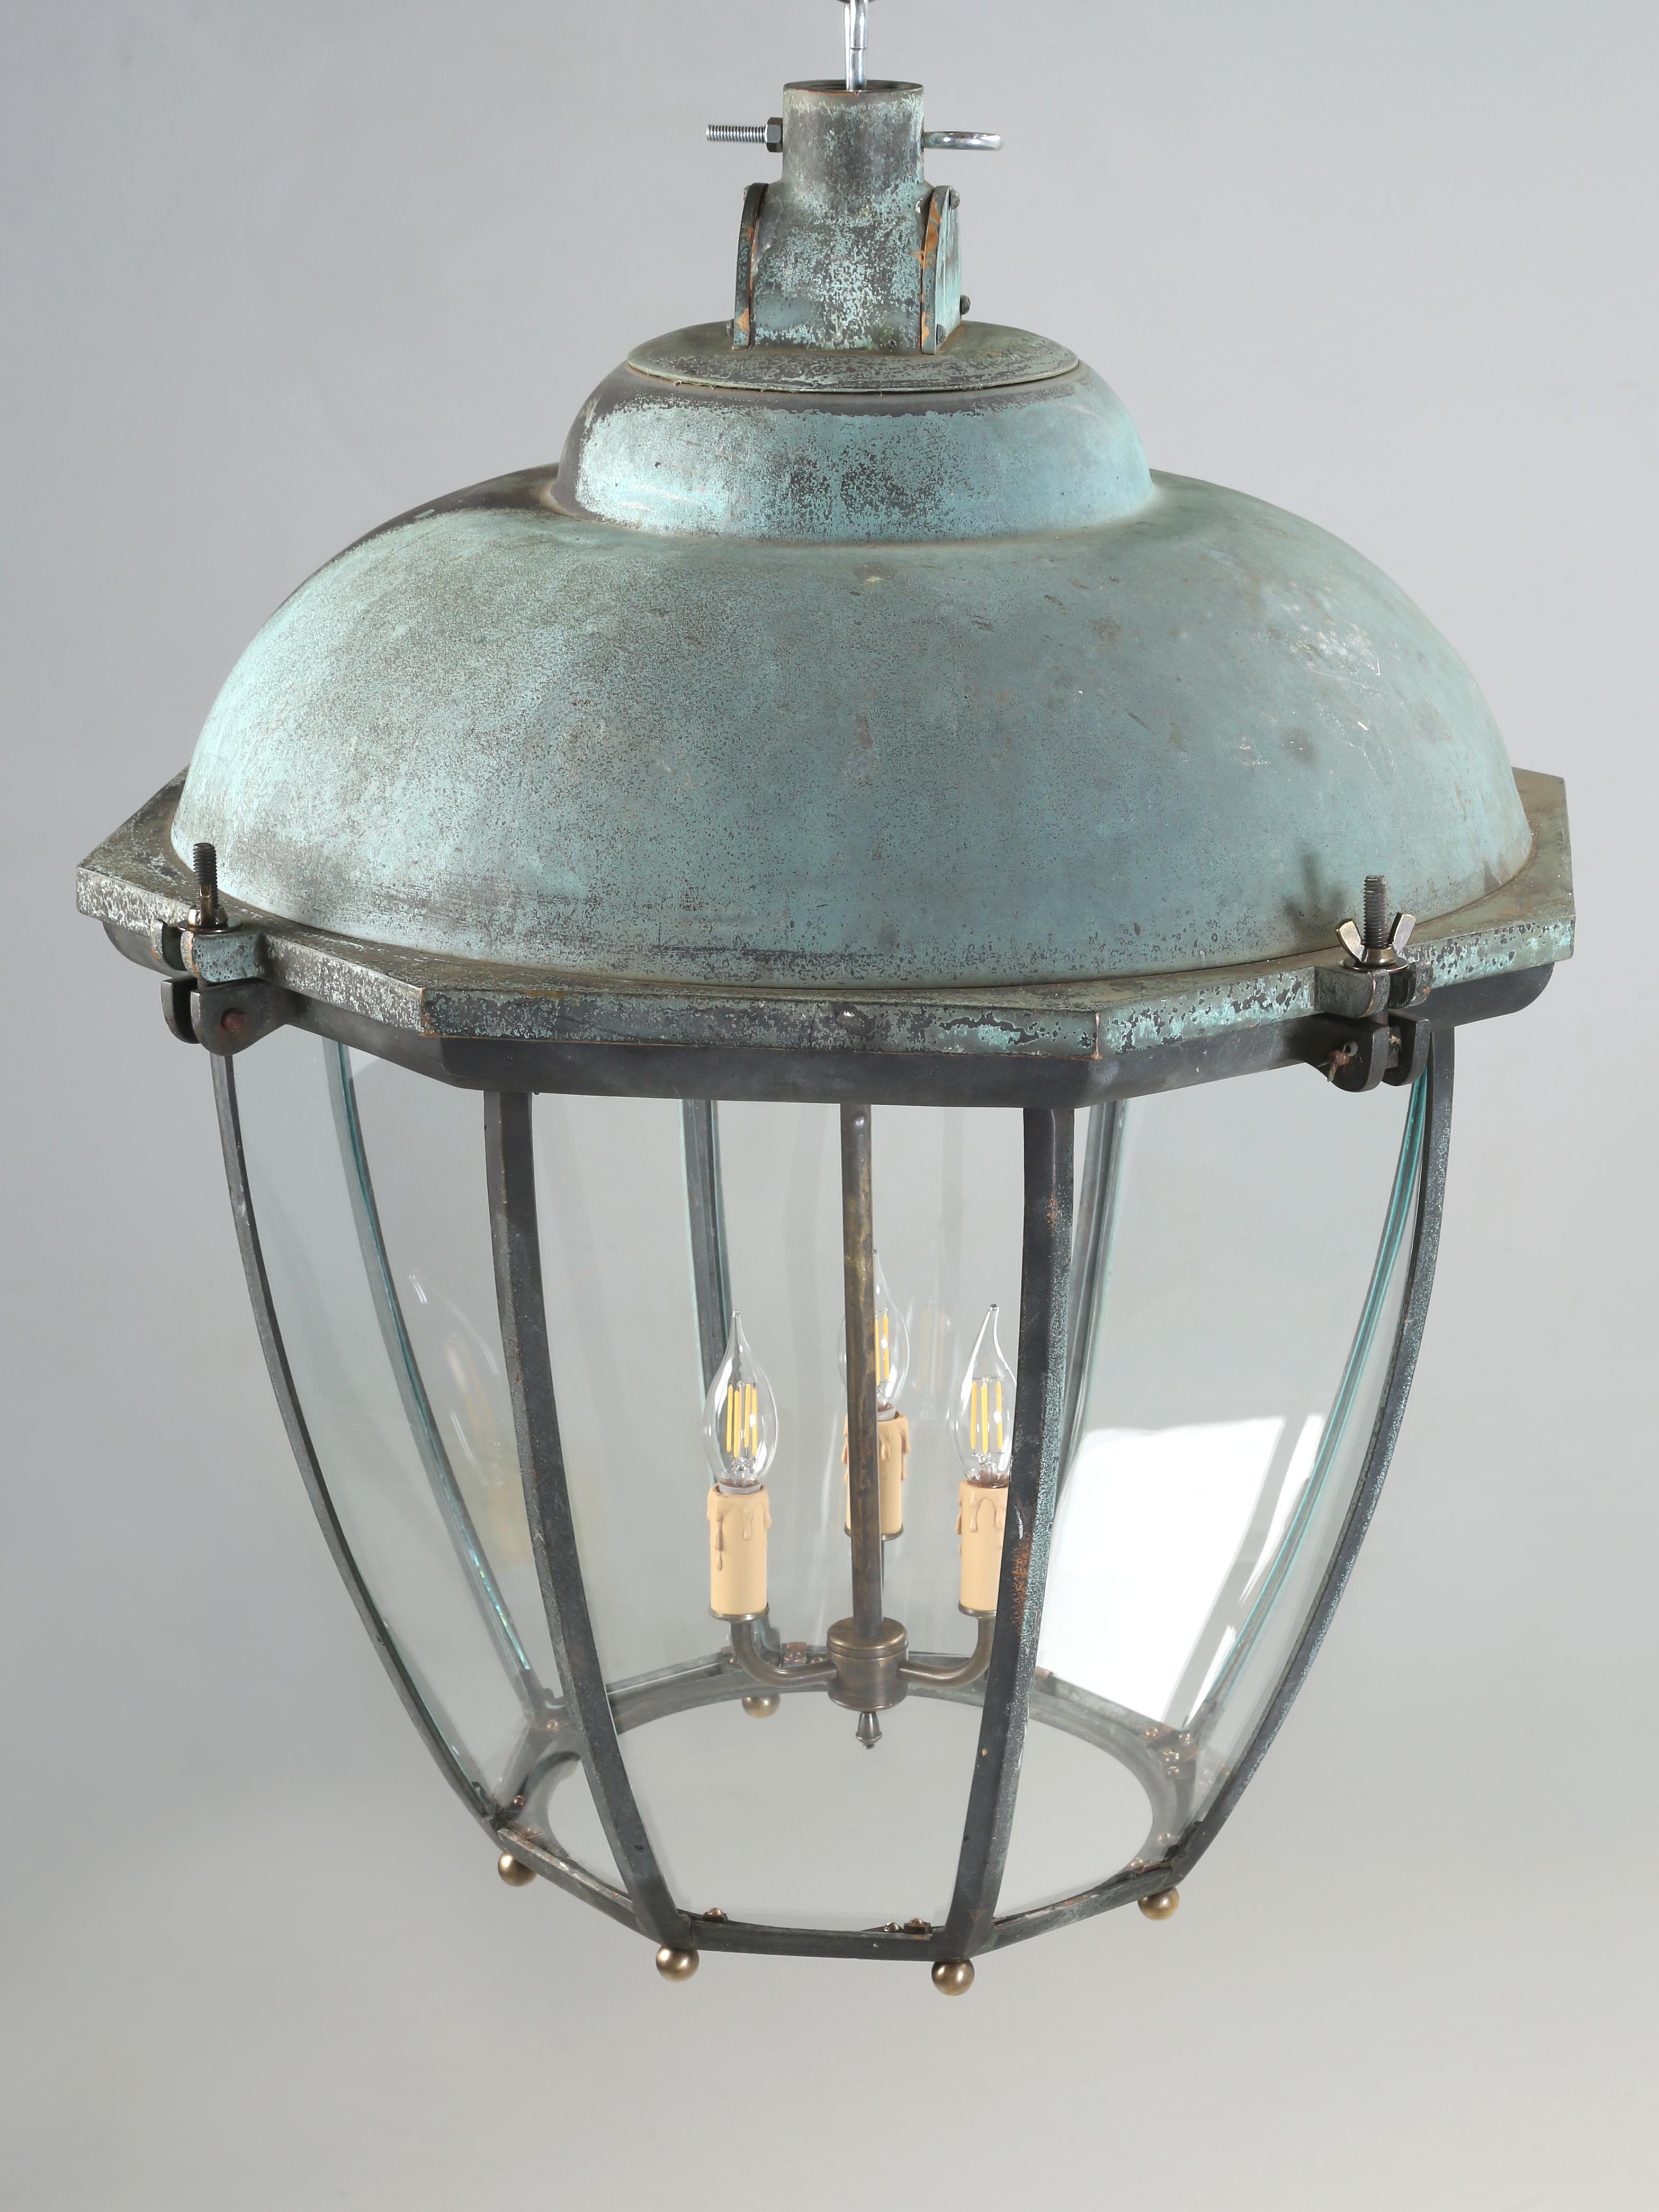 Country Bronze and Copper Lantern or Pendant Dublin Ireland Beautifully 1930's (5) Avail For Sale